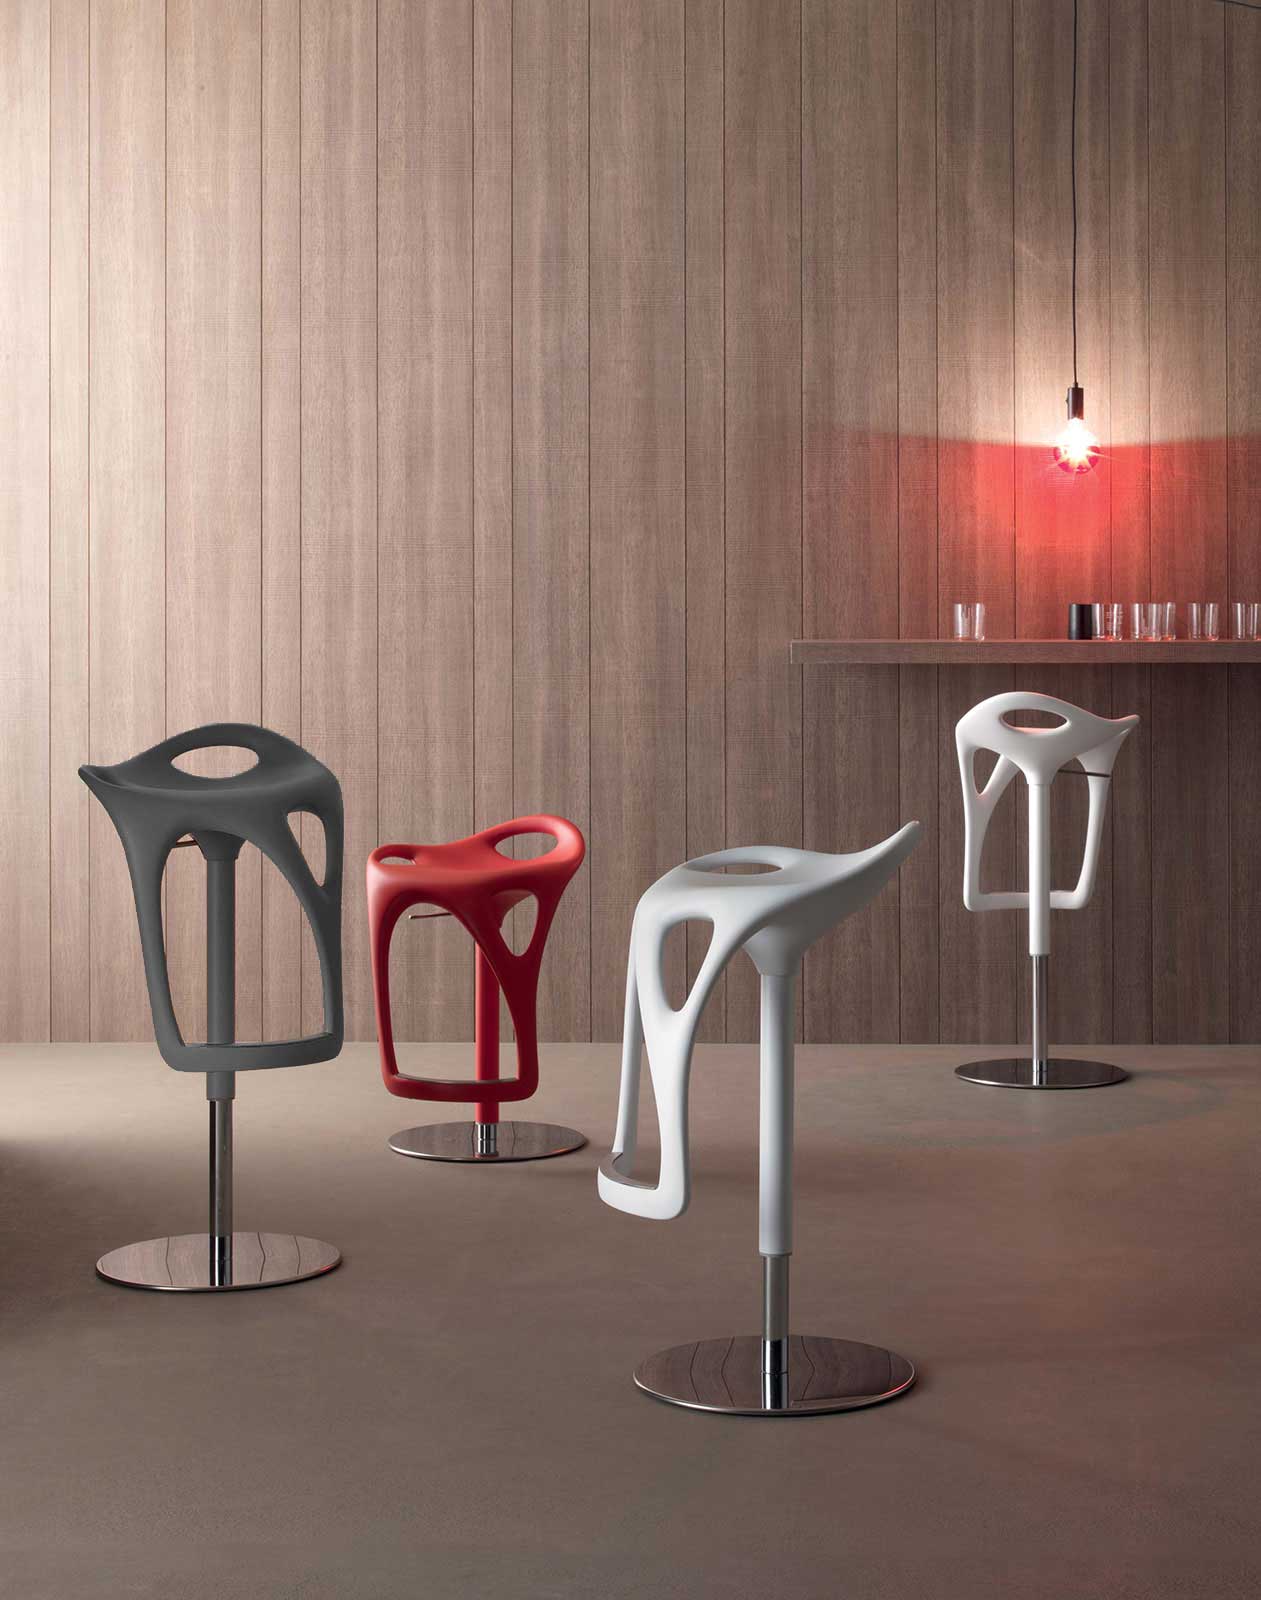 Mac, our adjustable swivel bar stool, helps bring a fun twist to your kitchen island ensemble or complete a sophisticated look in any living space. Shop now for kitchen bar stools.